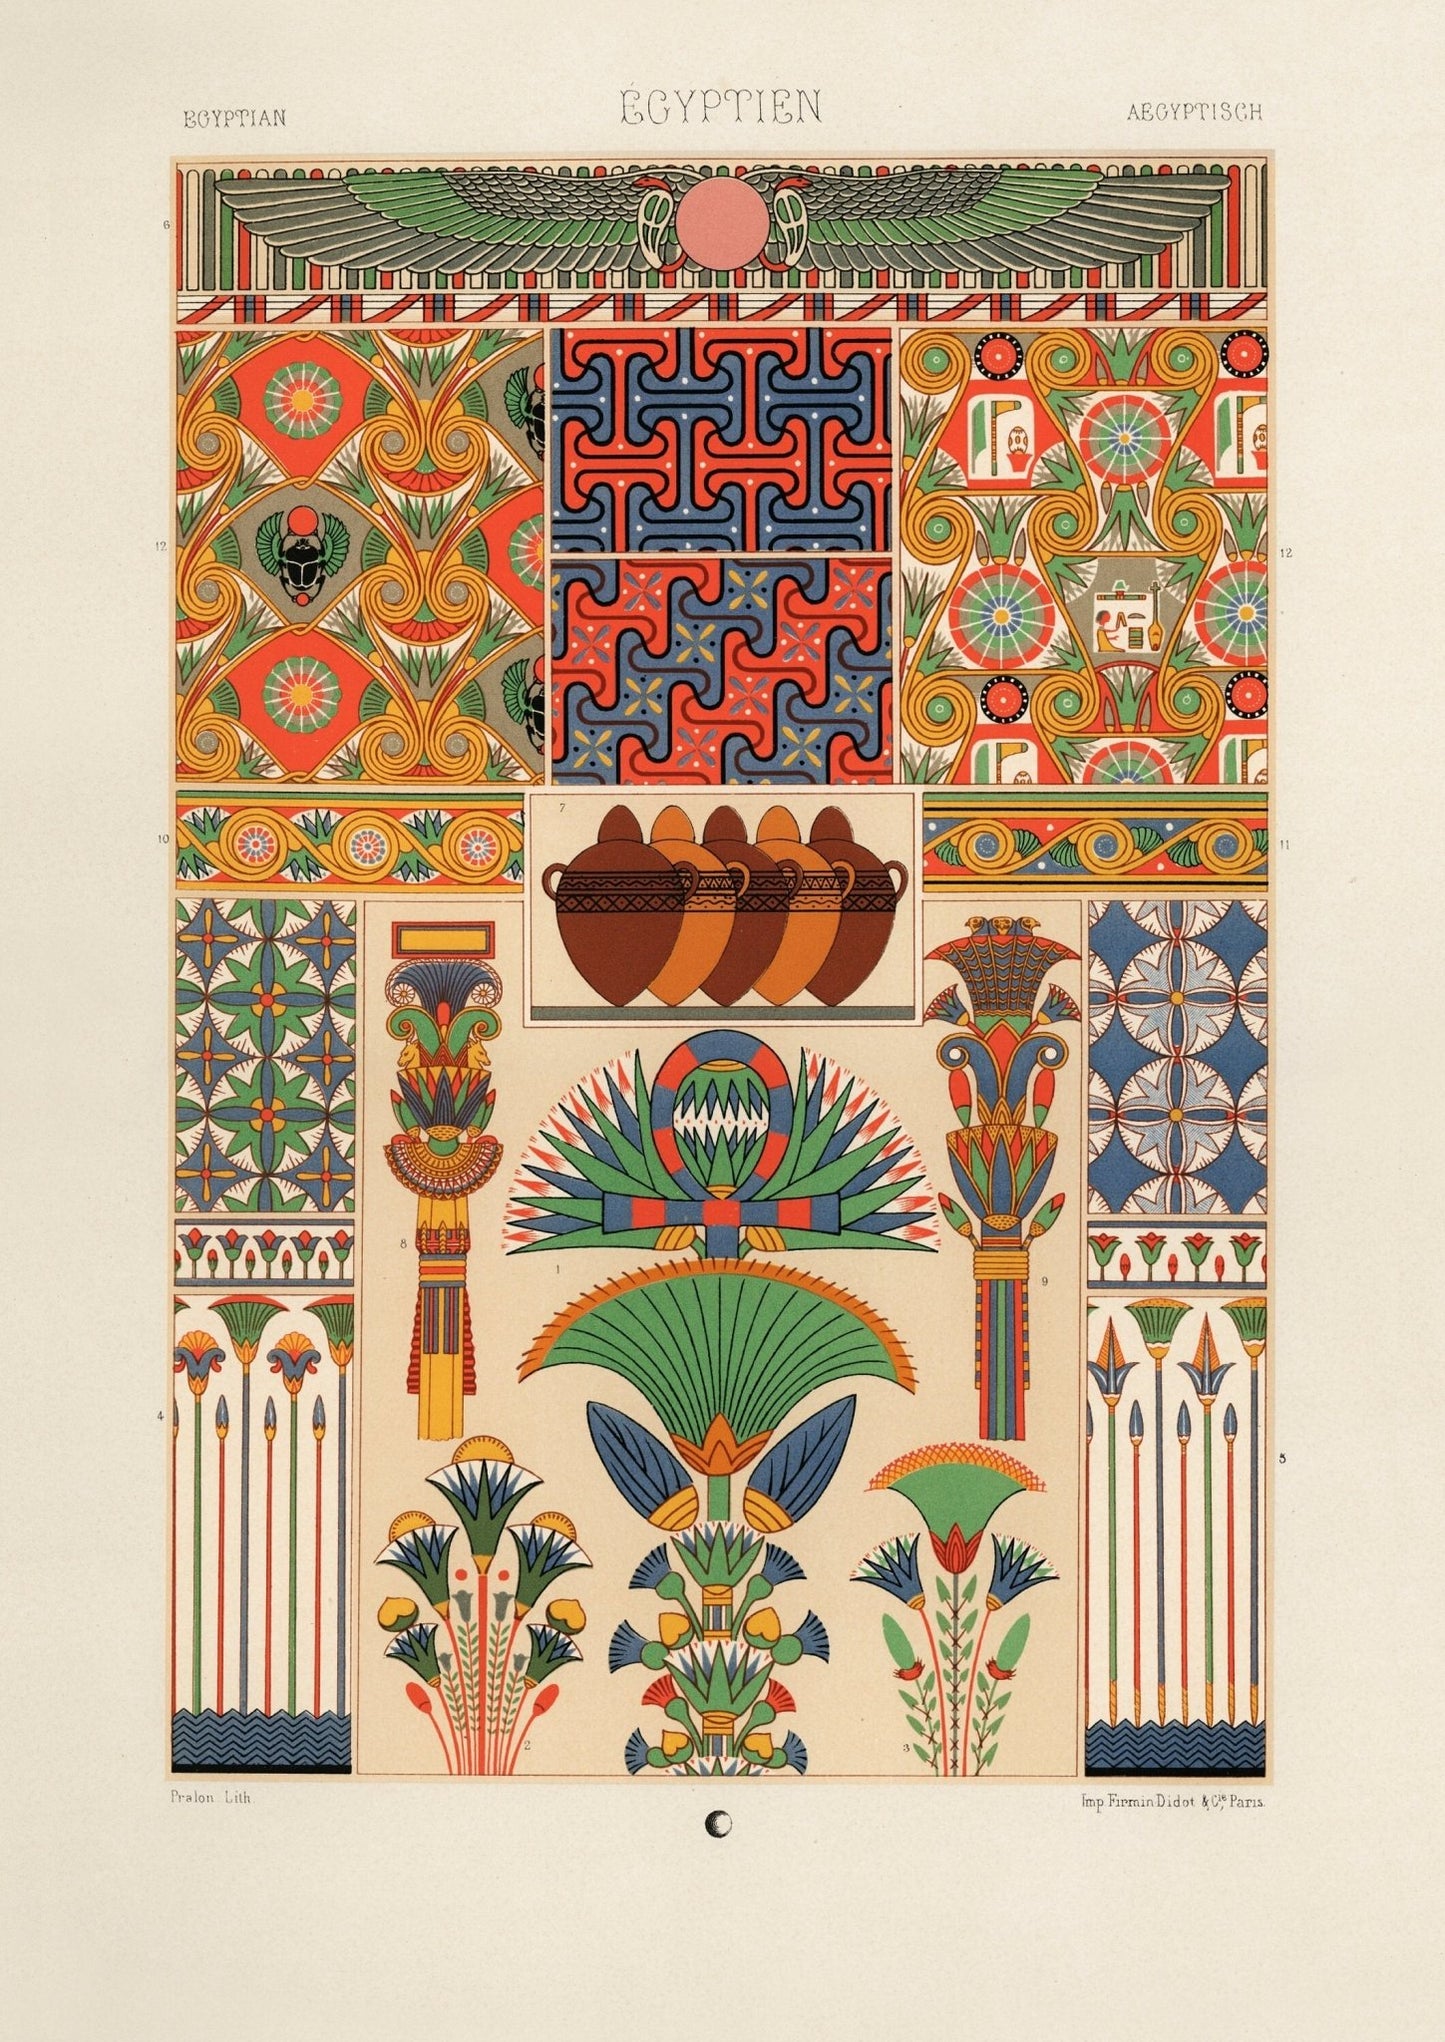 ALBERT RACINET - Egyptian Pattern Lithograph from 'L'ornement Polychrome'